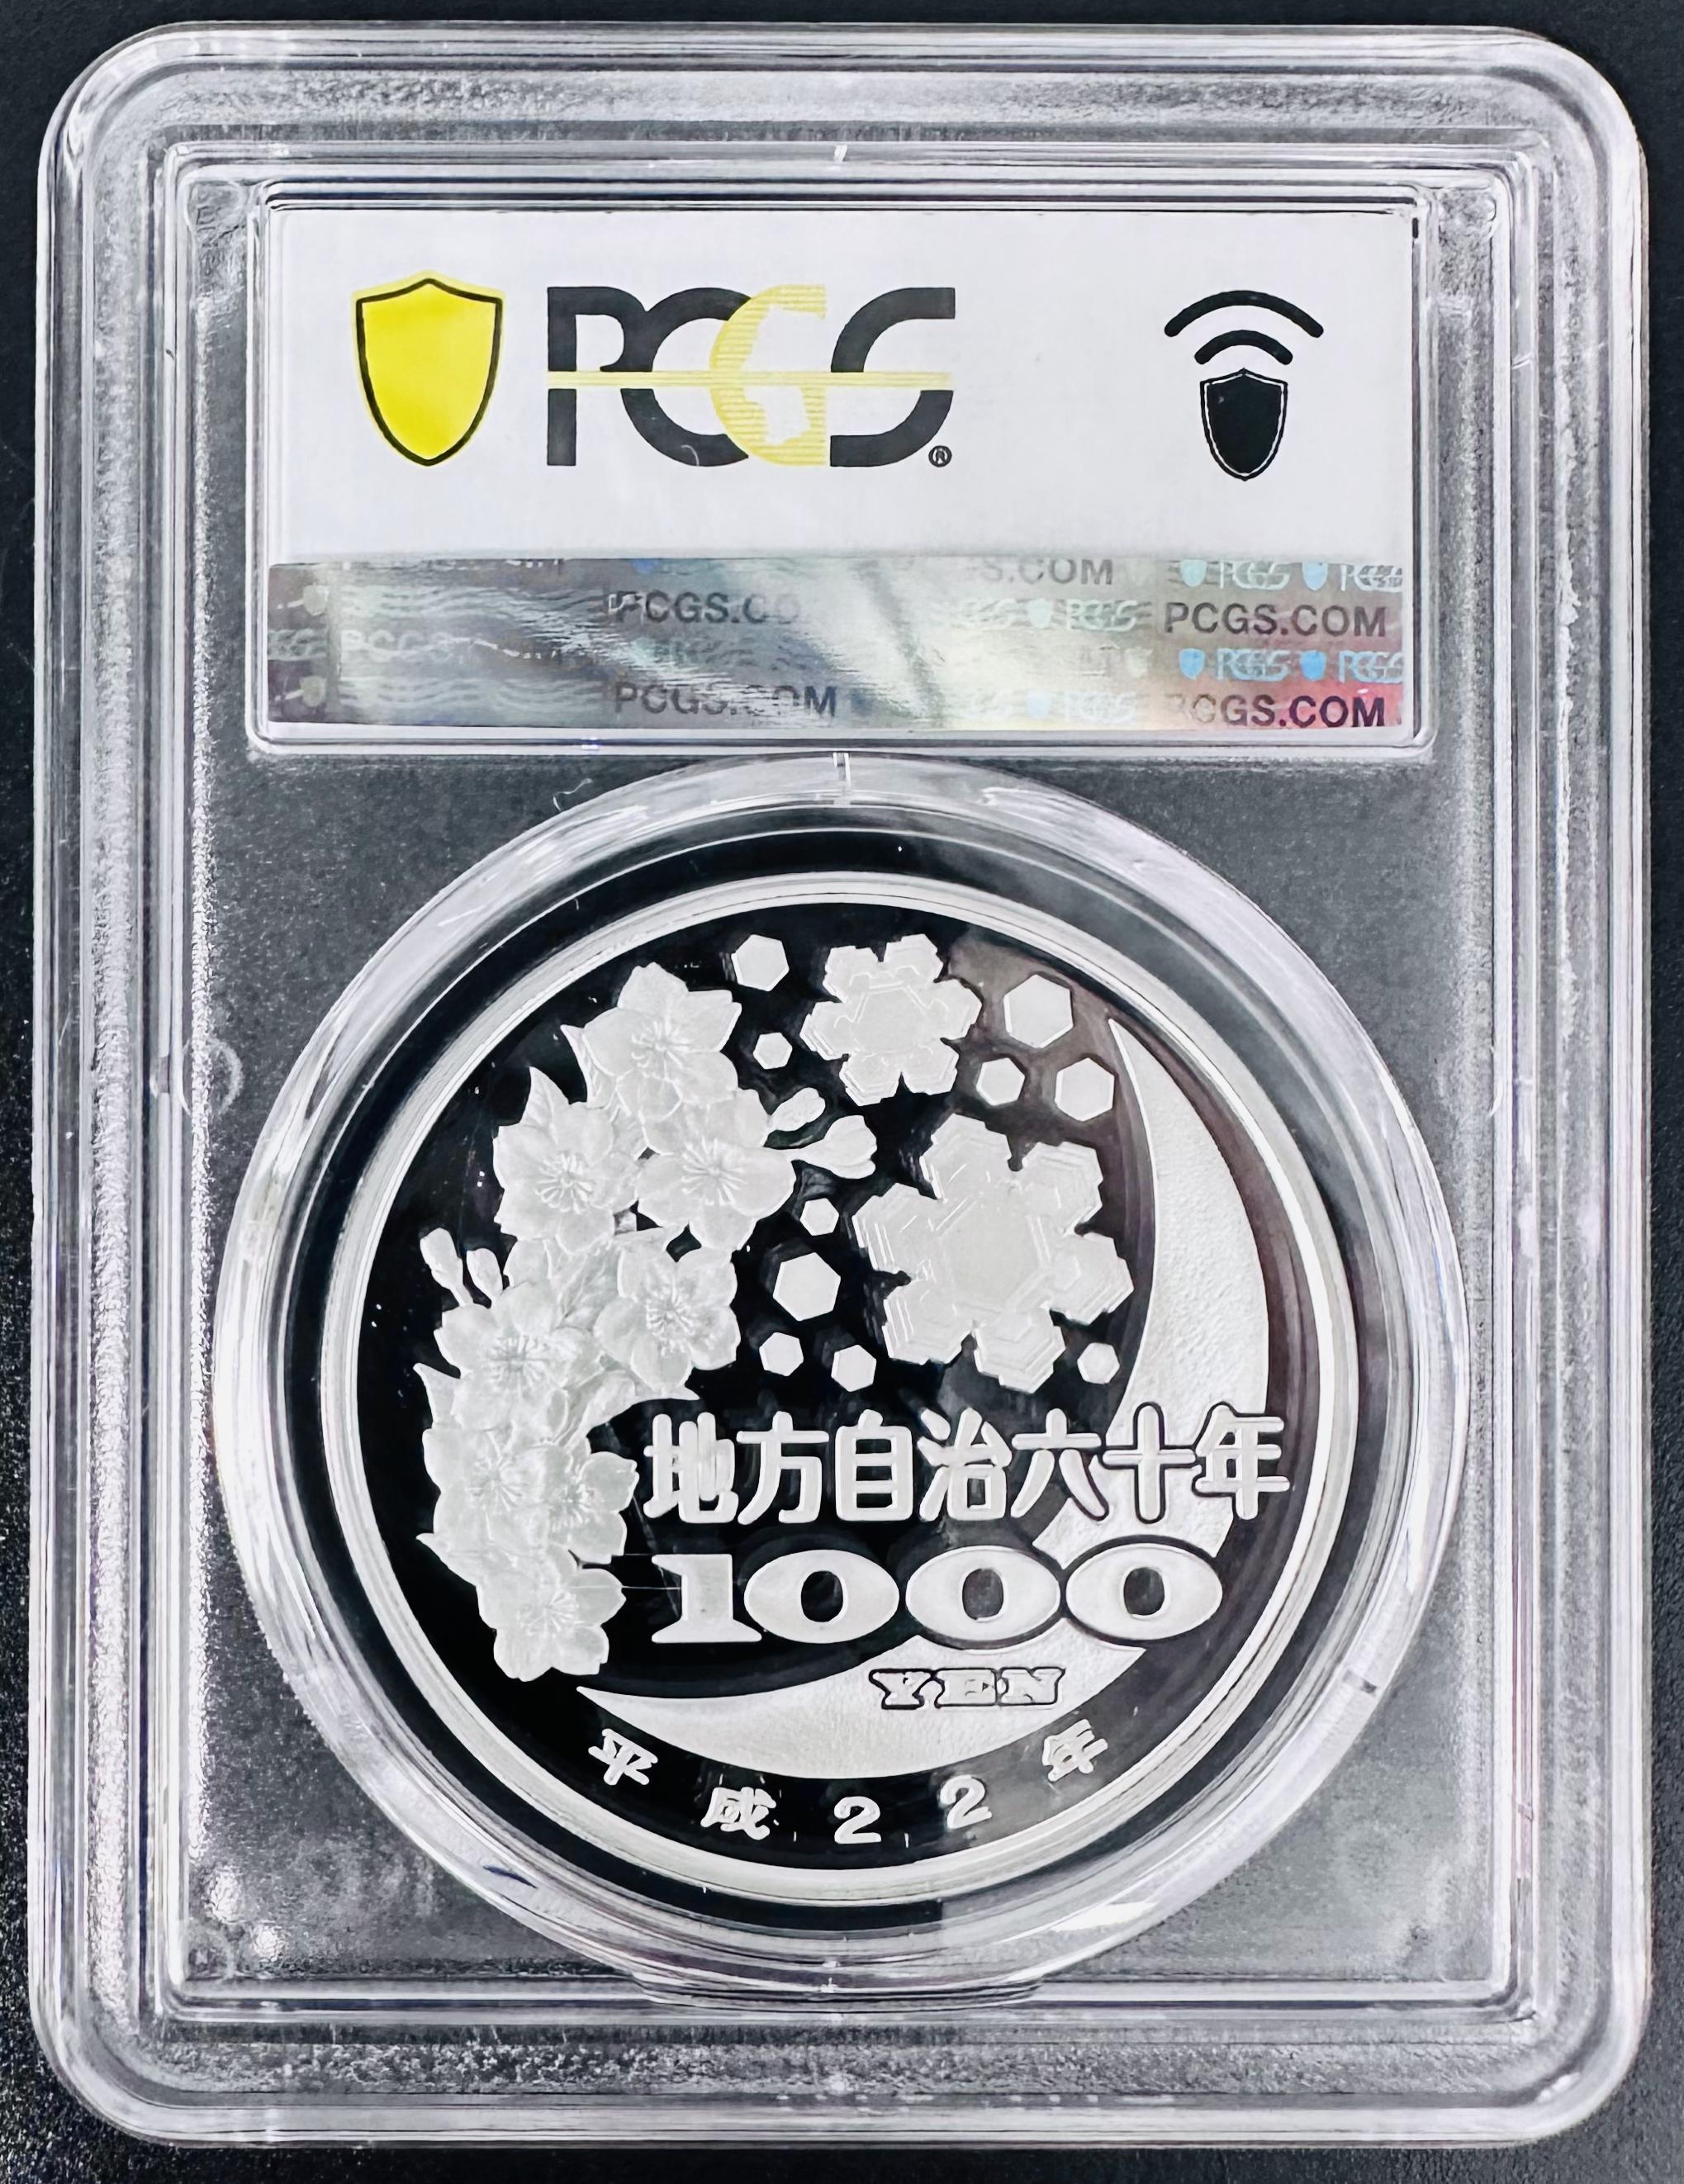 PCGS local government law . line 60 anniversary commemoration thousand jpy silver coin . proof money set Kochi prefecture local government thousand jpy silver coin 1000 jpy silver coin 